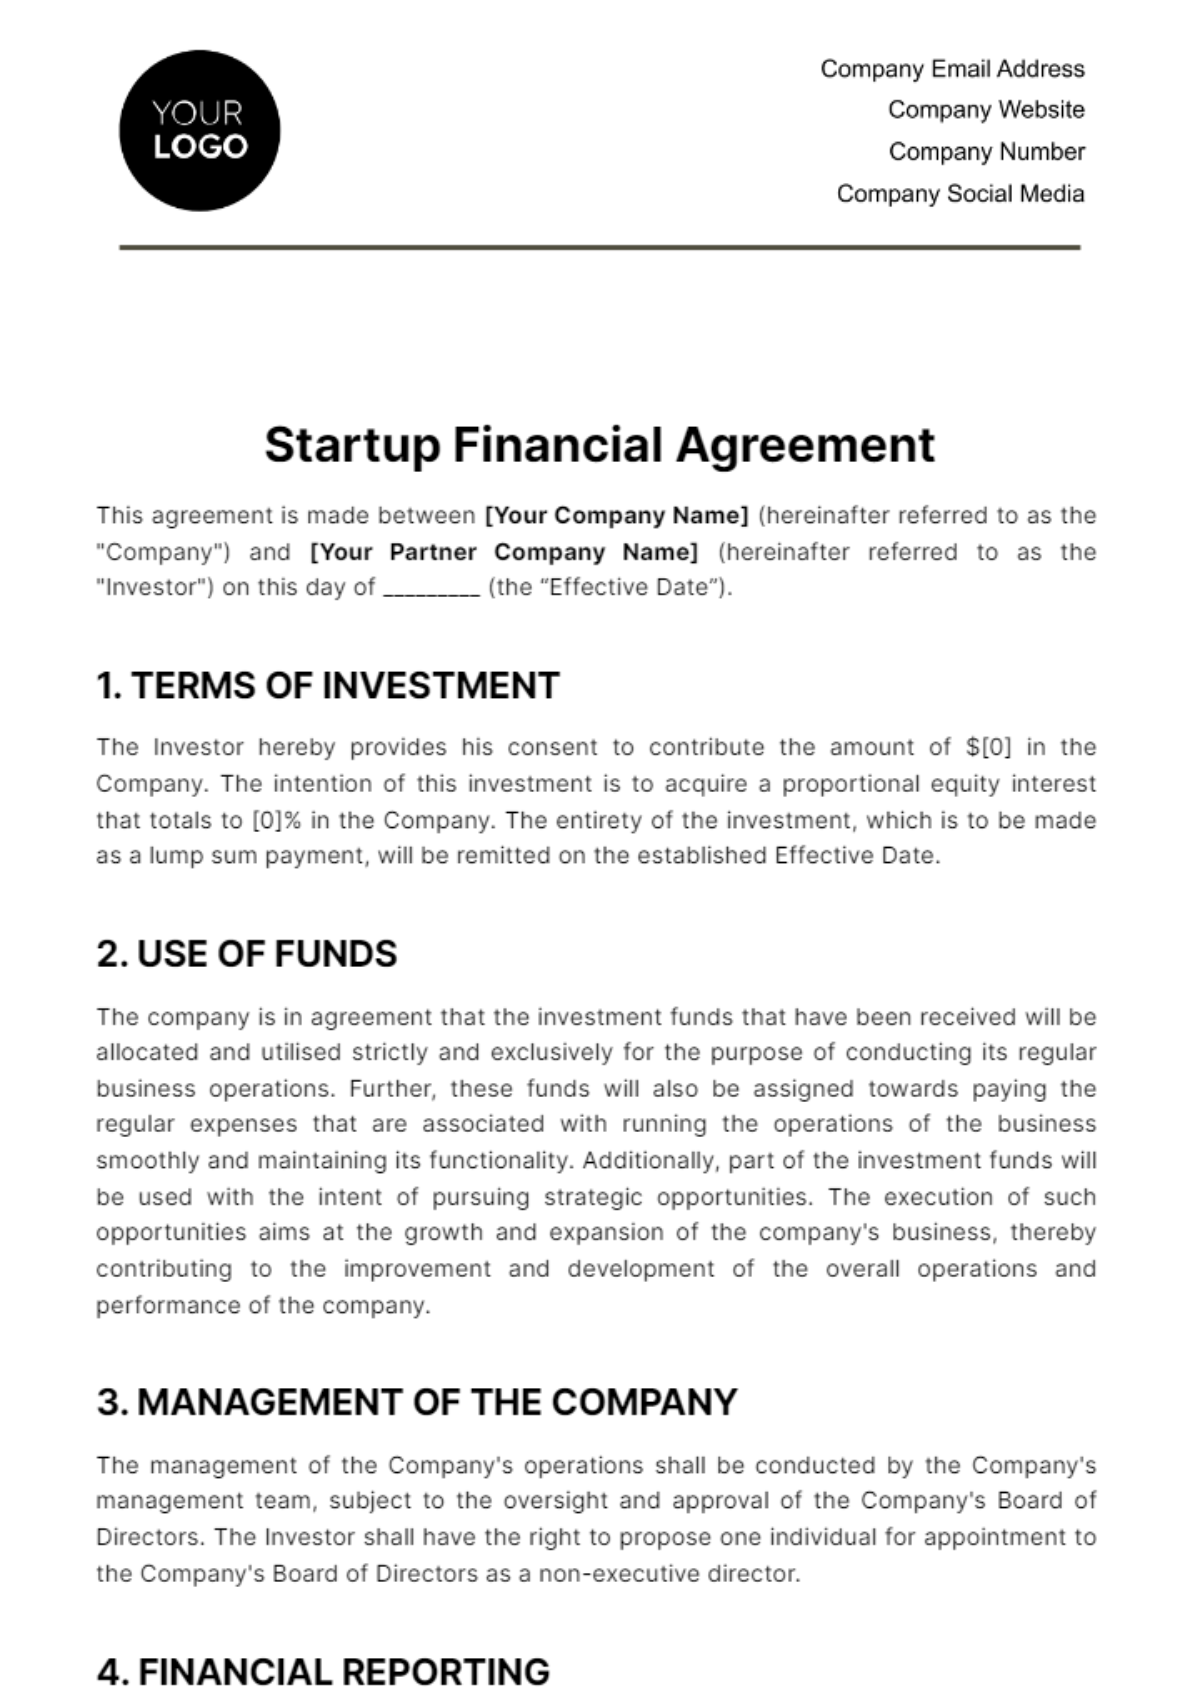 Free Startup Financial Agreement Template